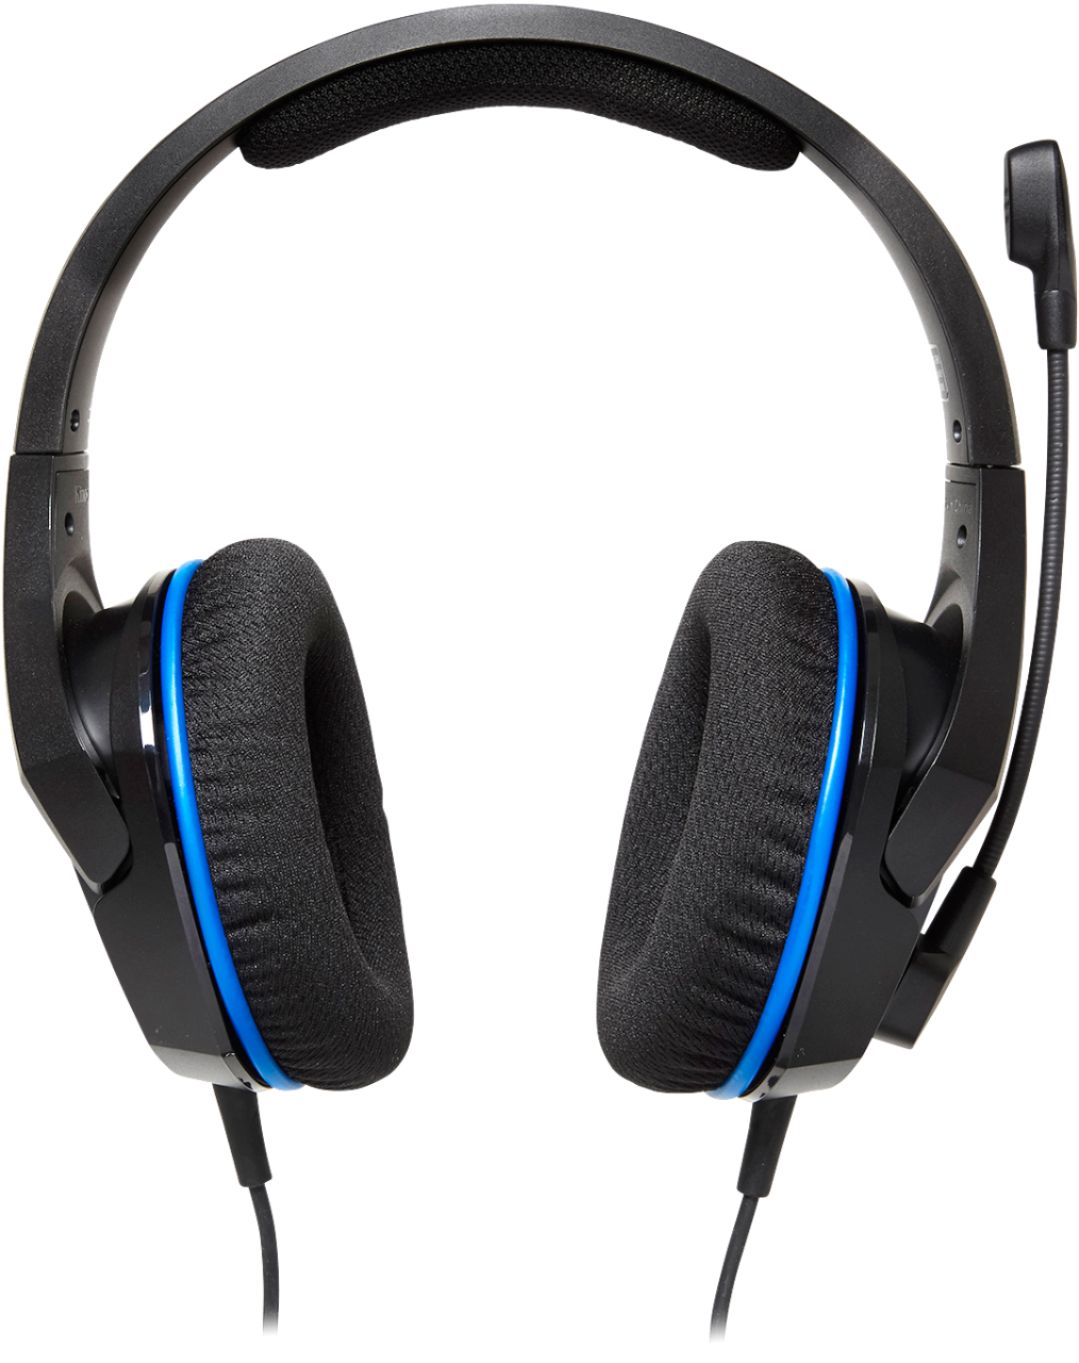  HyperX Cloud Stinger Core - Gaming headset for PC, PlayStation  4/5, Xbox One, Xbox Series XS, Nintendo Switch, DTS Headphone:X spatial  audio, Lightweight over-ear headset with mic,Black : Video Games